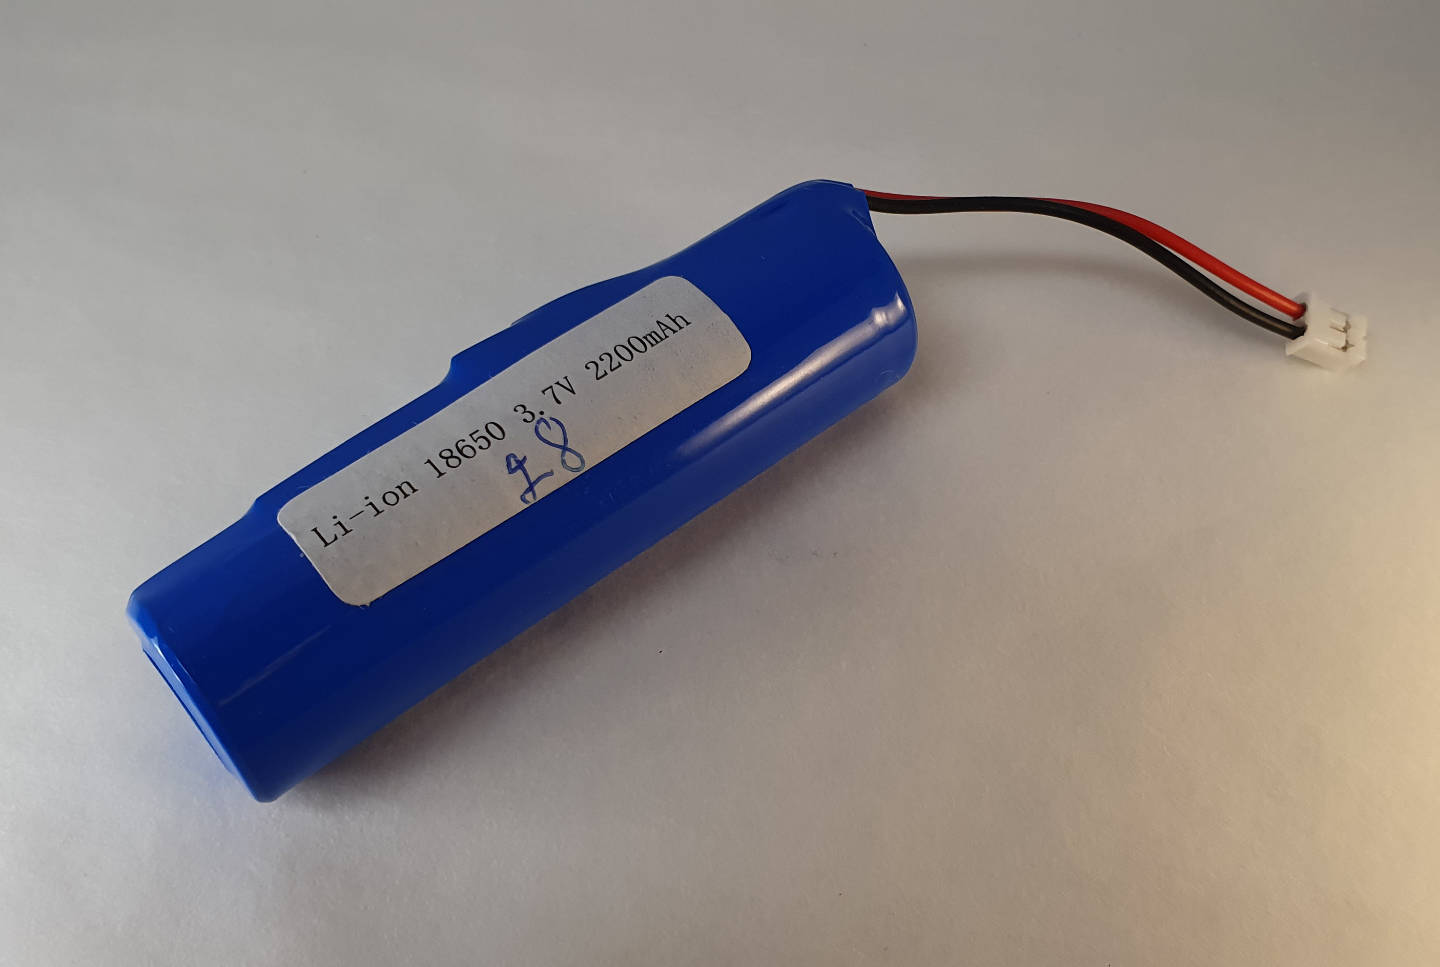 Protected 2200mAh 18650 Lithium Ion Battery (testing sample sale)